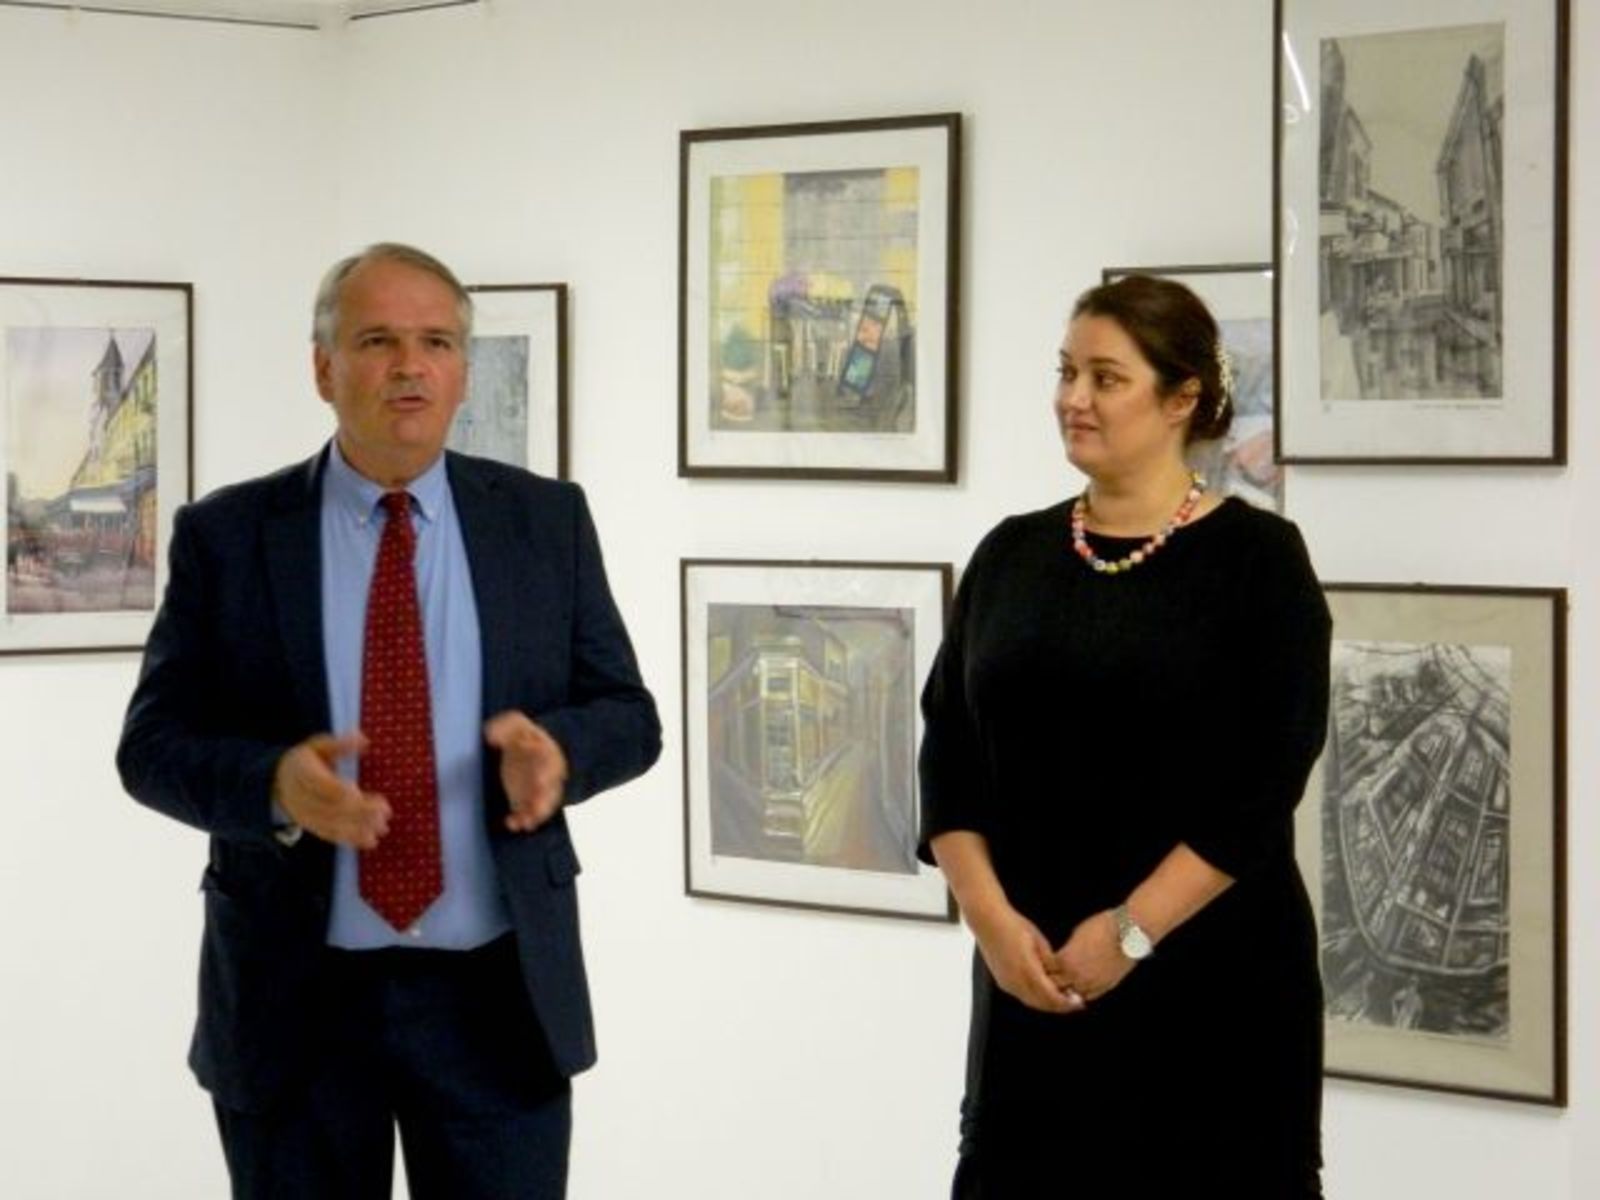 OPENING OF AN EXHIBITION OF CHILDREN'S ART FROM BITOLA